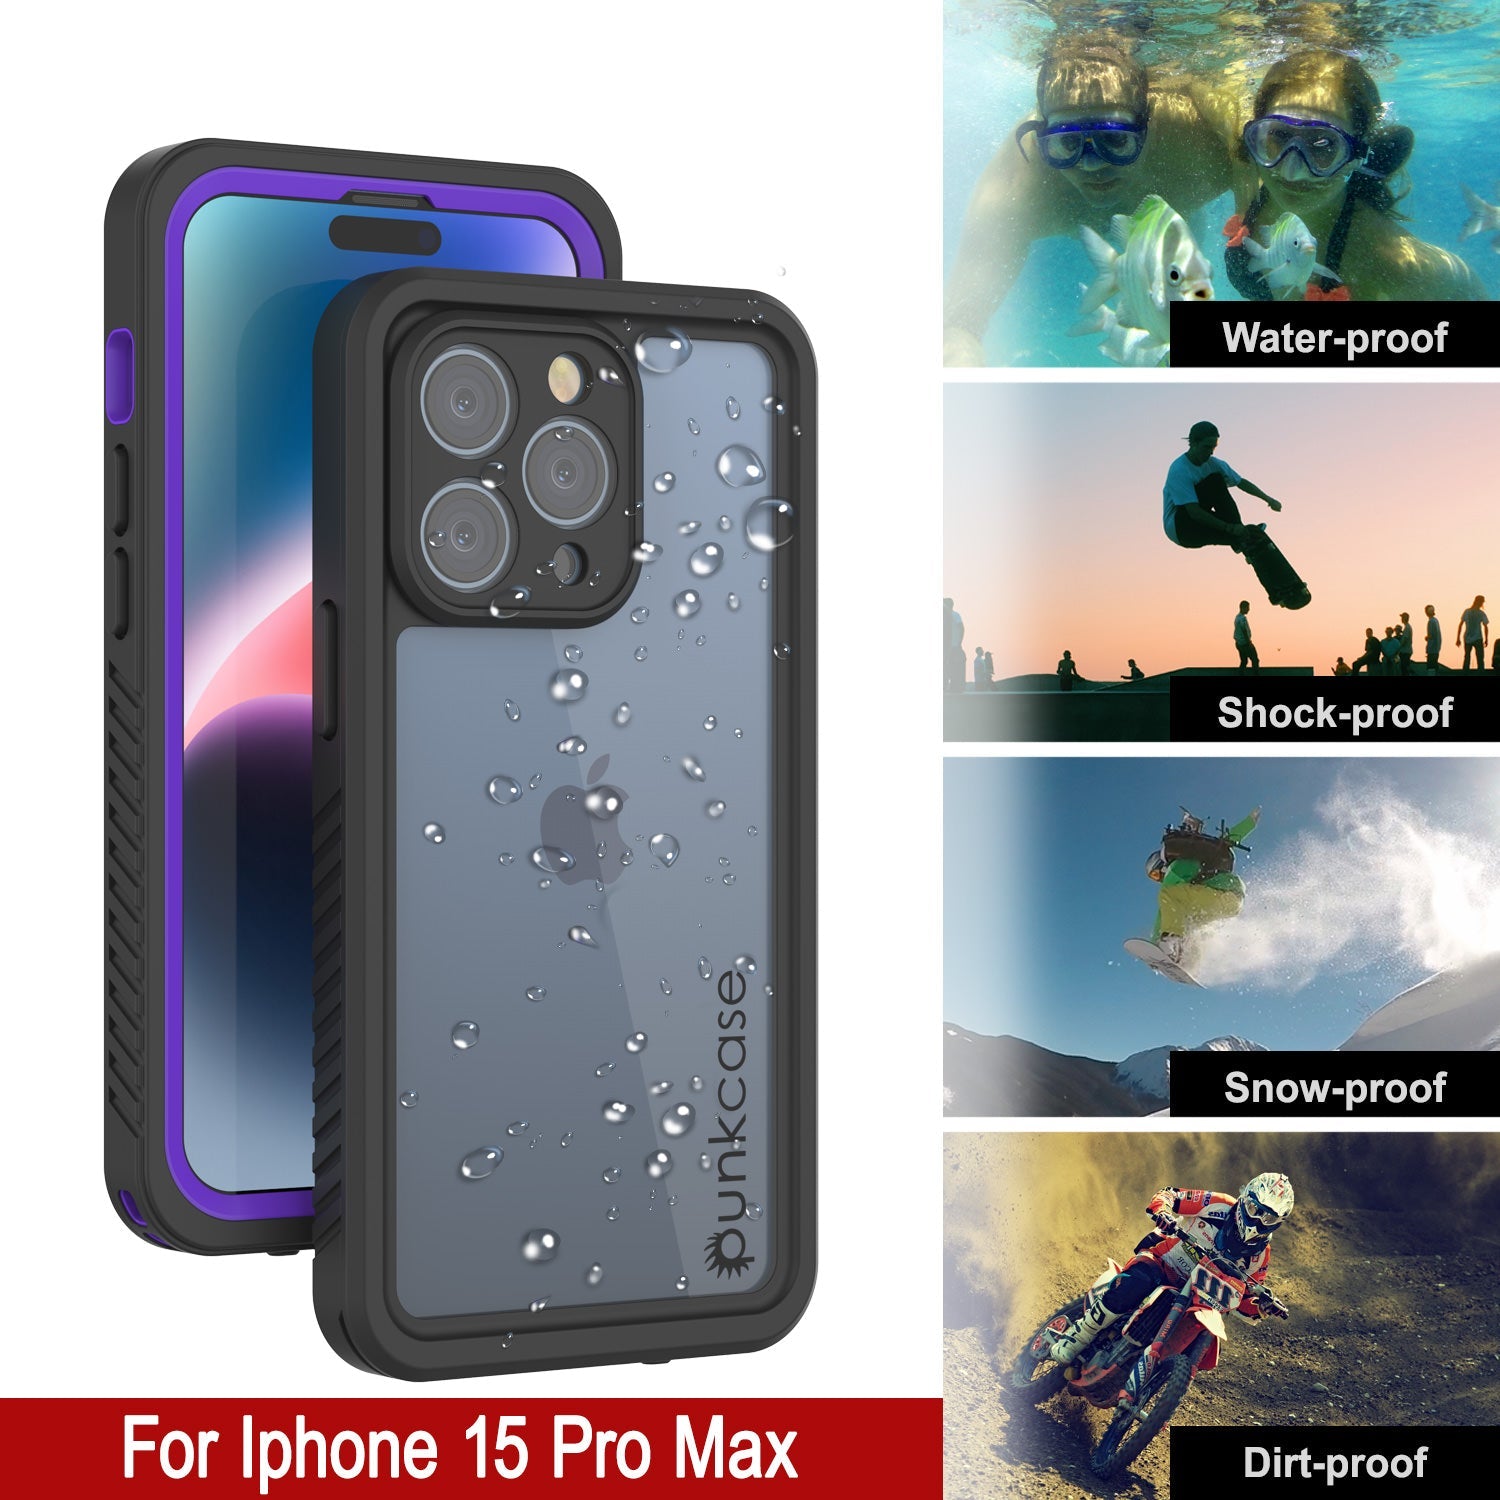 iPhone 15 Pro Max Waterproof Case, Punkcase [Extreme Series] Armor Cover W/ Built In Screen Protector [Purple]